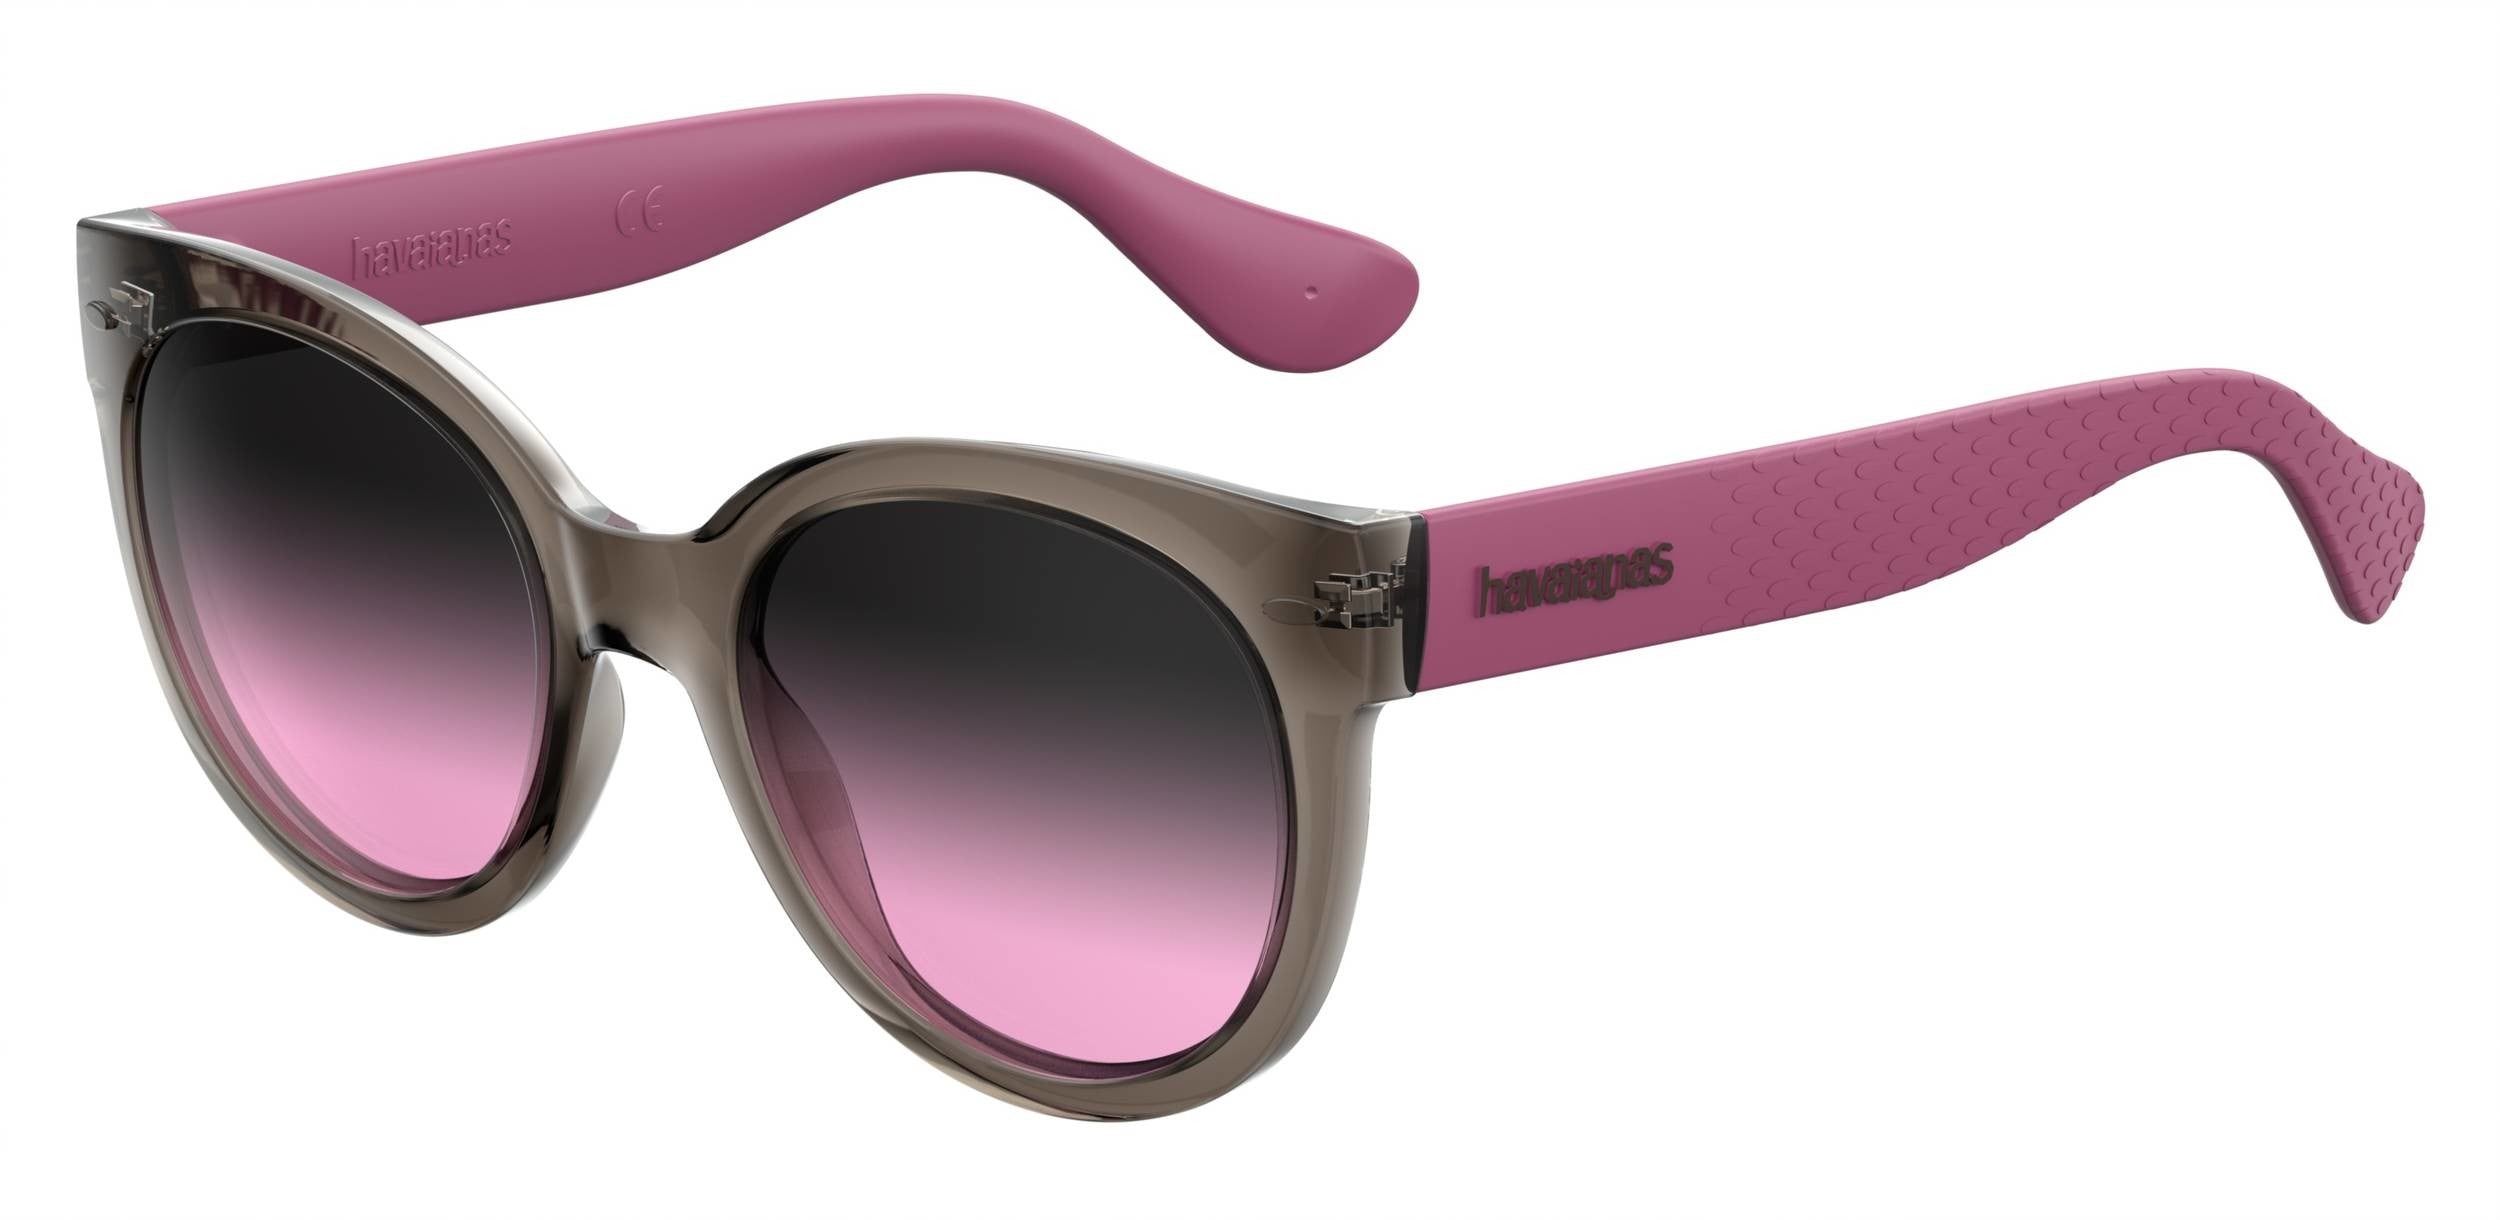 Havaianas Noronha/M Cat Eye/butterfly Sunglasses 07HH-07HH  Gray Pink (FF Gray Shded Pink)